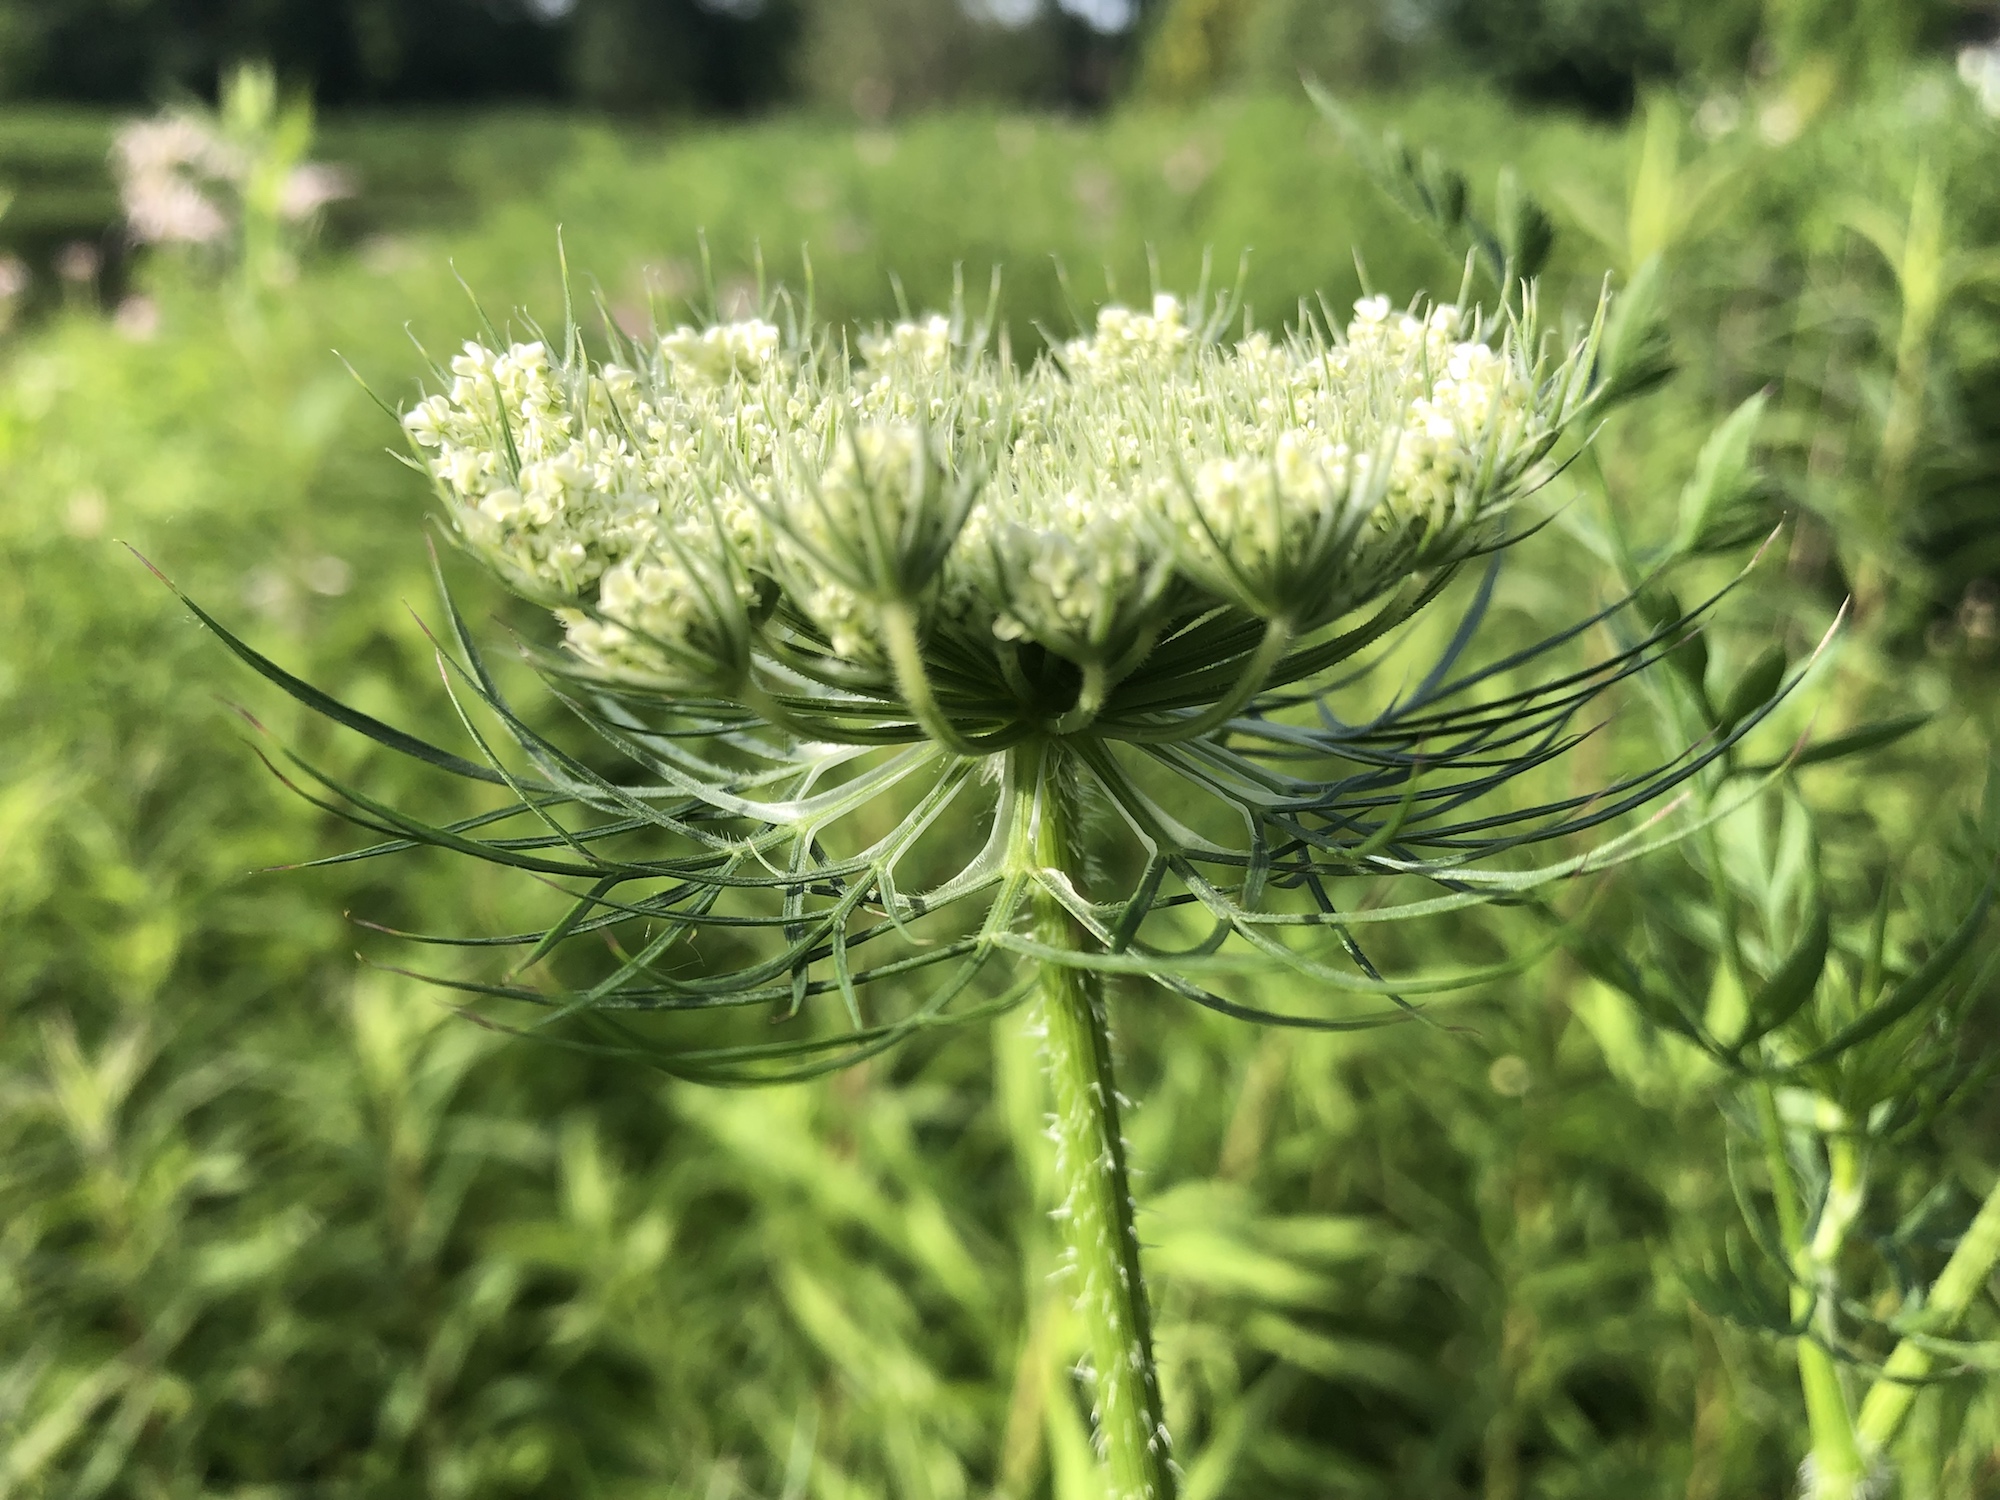 Queen Anne's Lace on bank of retaining pond on the corner of Nakoma Road and Manitou Way in Madison, WI on June 26, 2019.